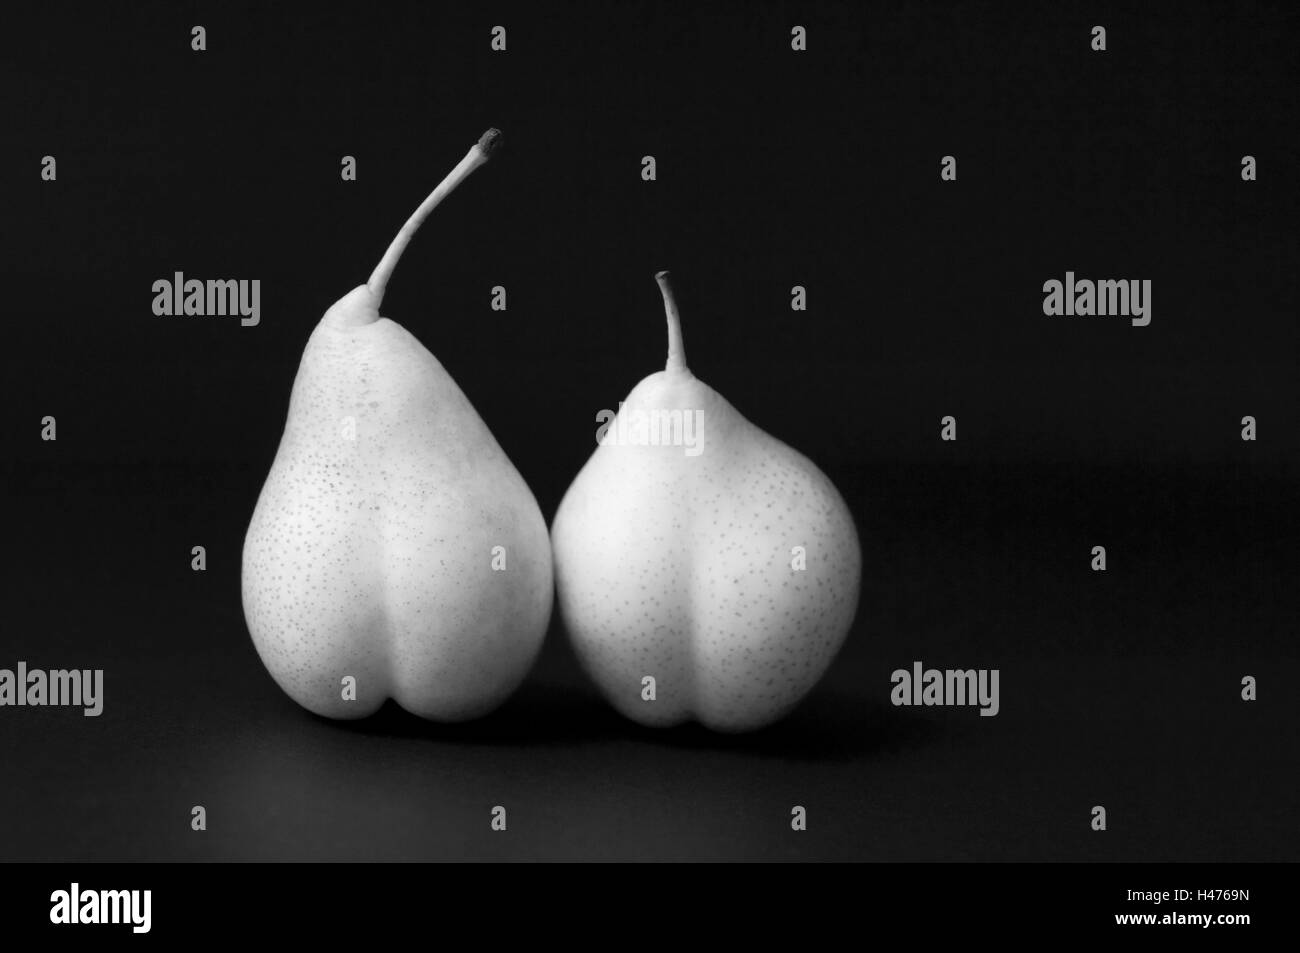 two pears, Pyrus, s/w, Stock Photo